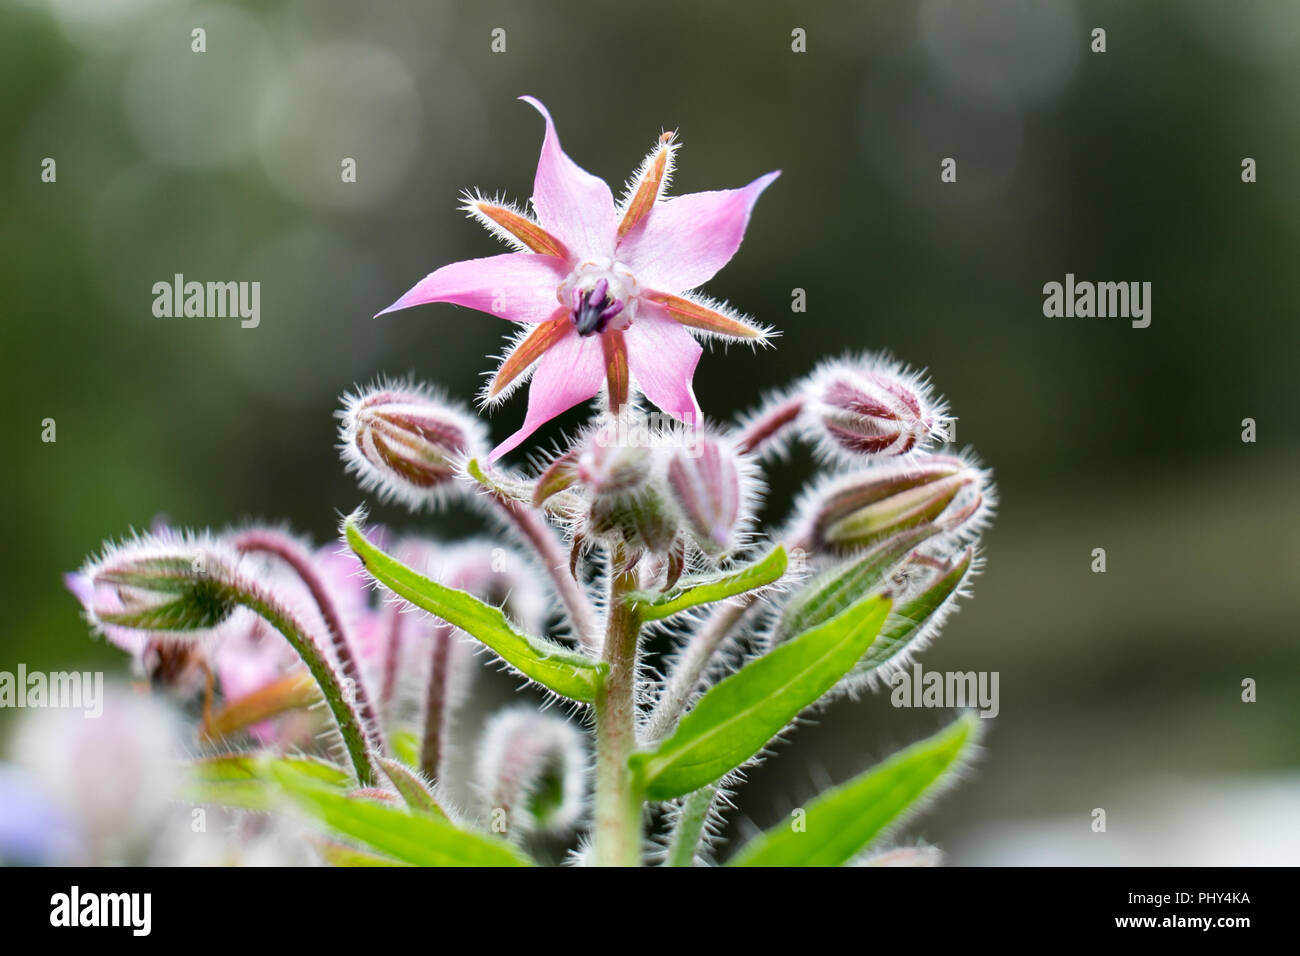 Pink edible borage star flower - macro close up detailing hairs, petals, leaves with shallow depth of field Stock Photo